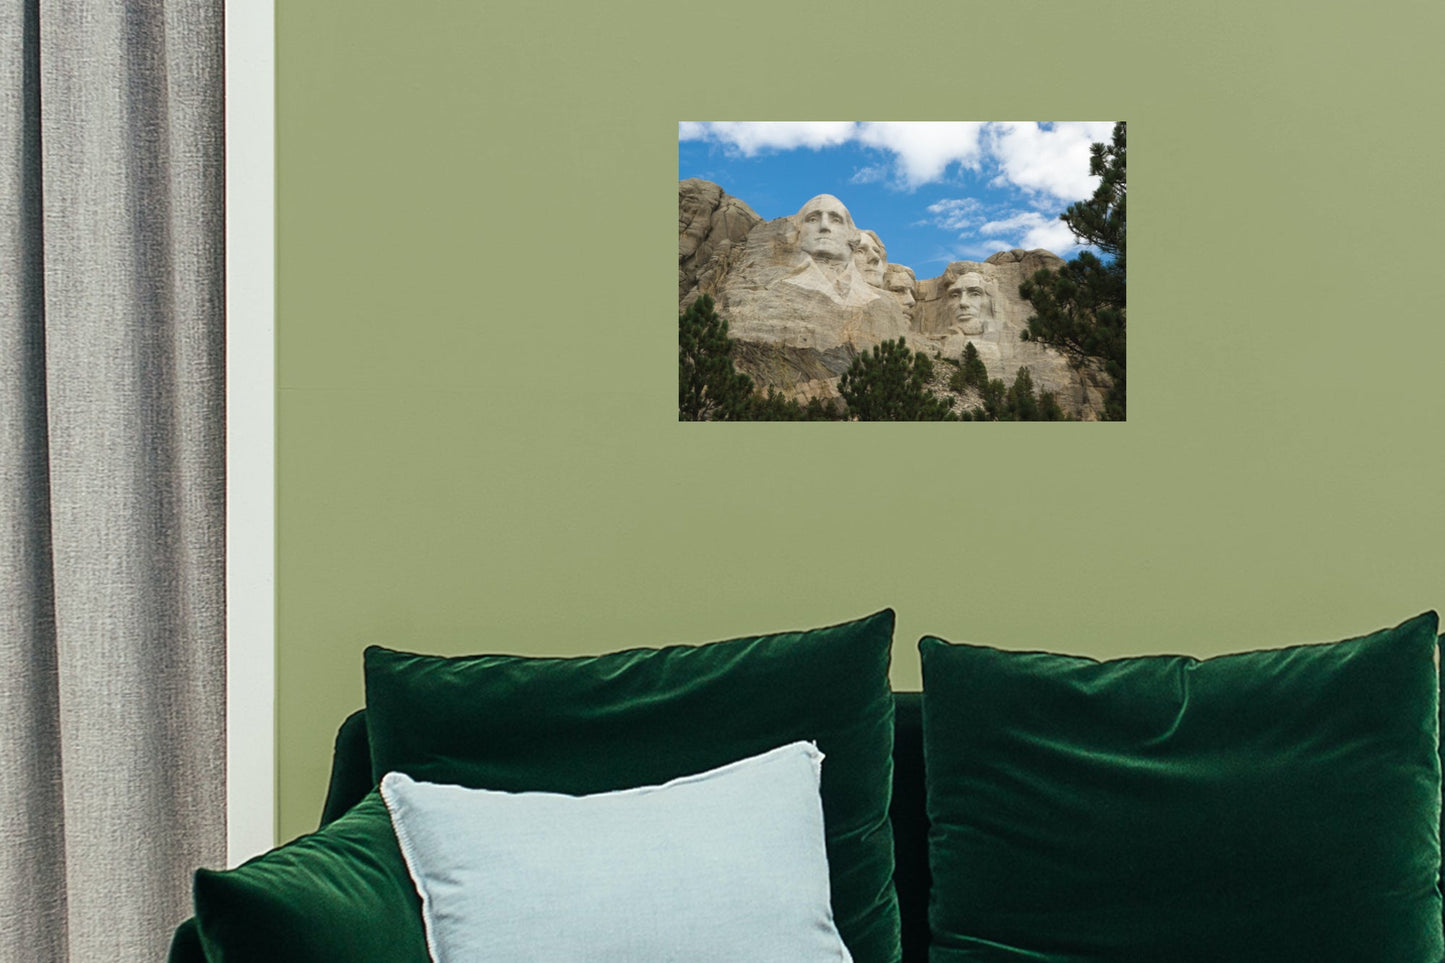 Popular Landmarks: Mount Rushmore Realistic Poster - Removable Adhesive Decal